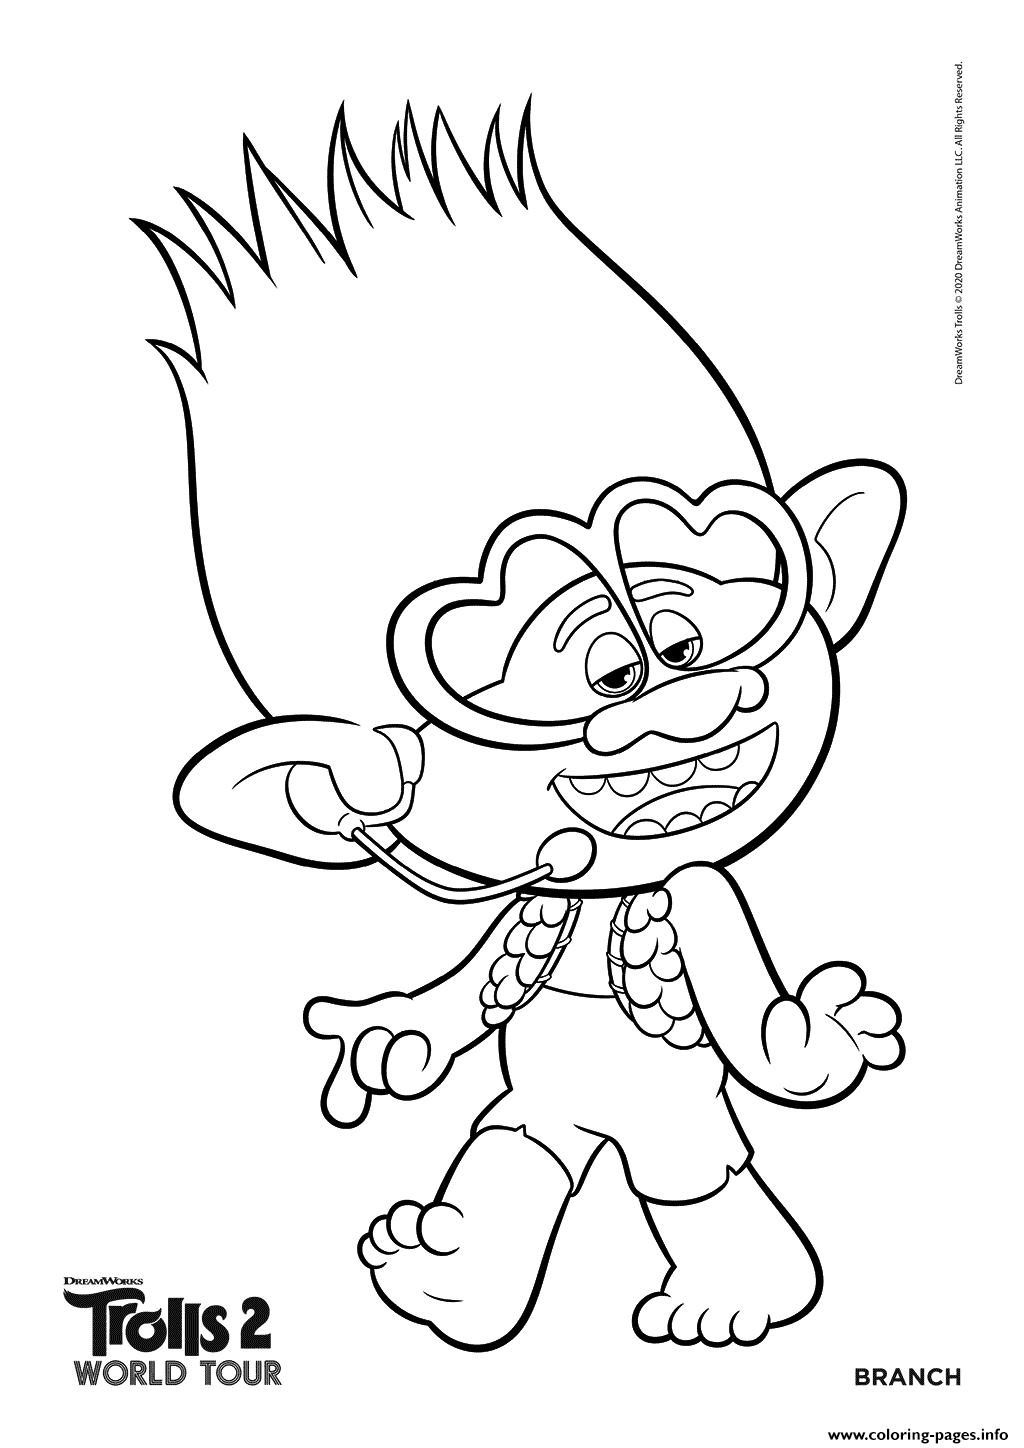 Trolls 2 Branch World Tour Coloring Page Printable - Reverasite